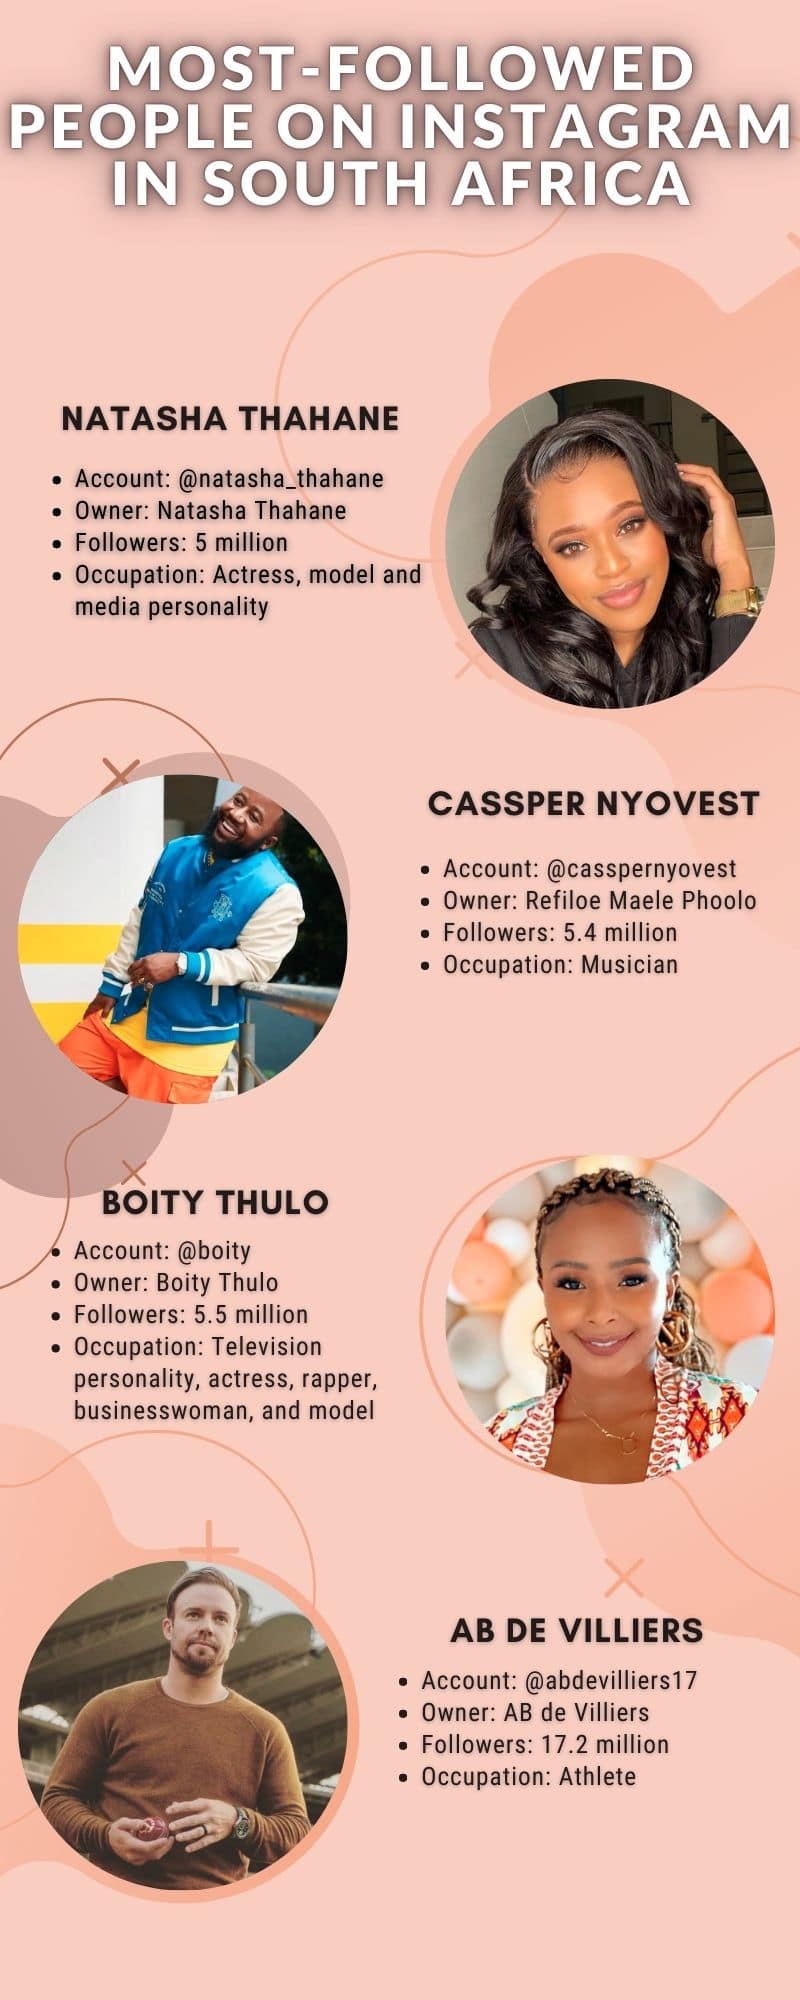 Most-followed people on Instagram in South Africa